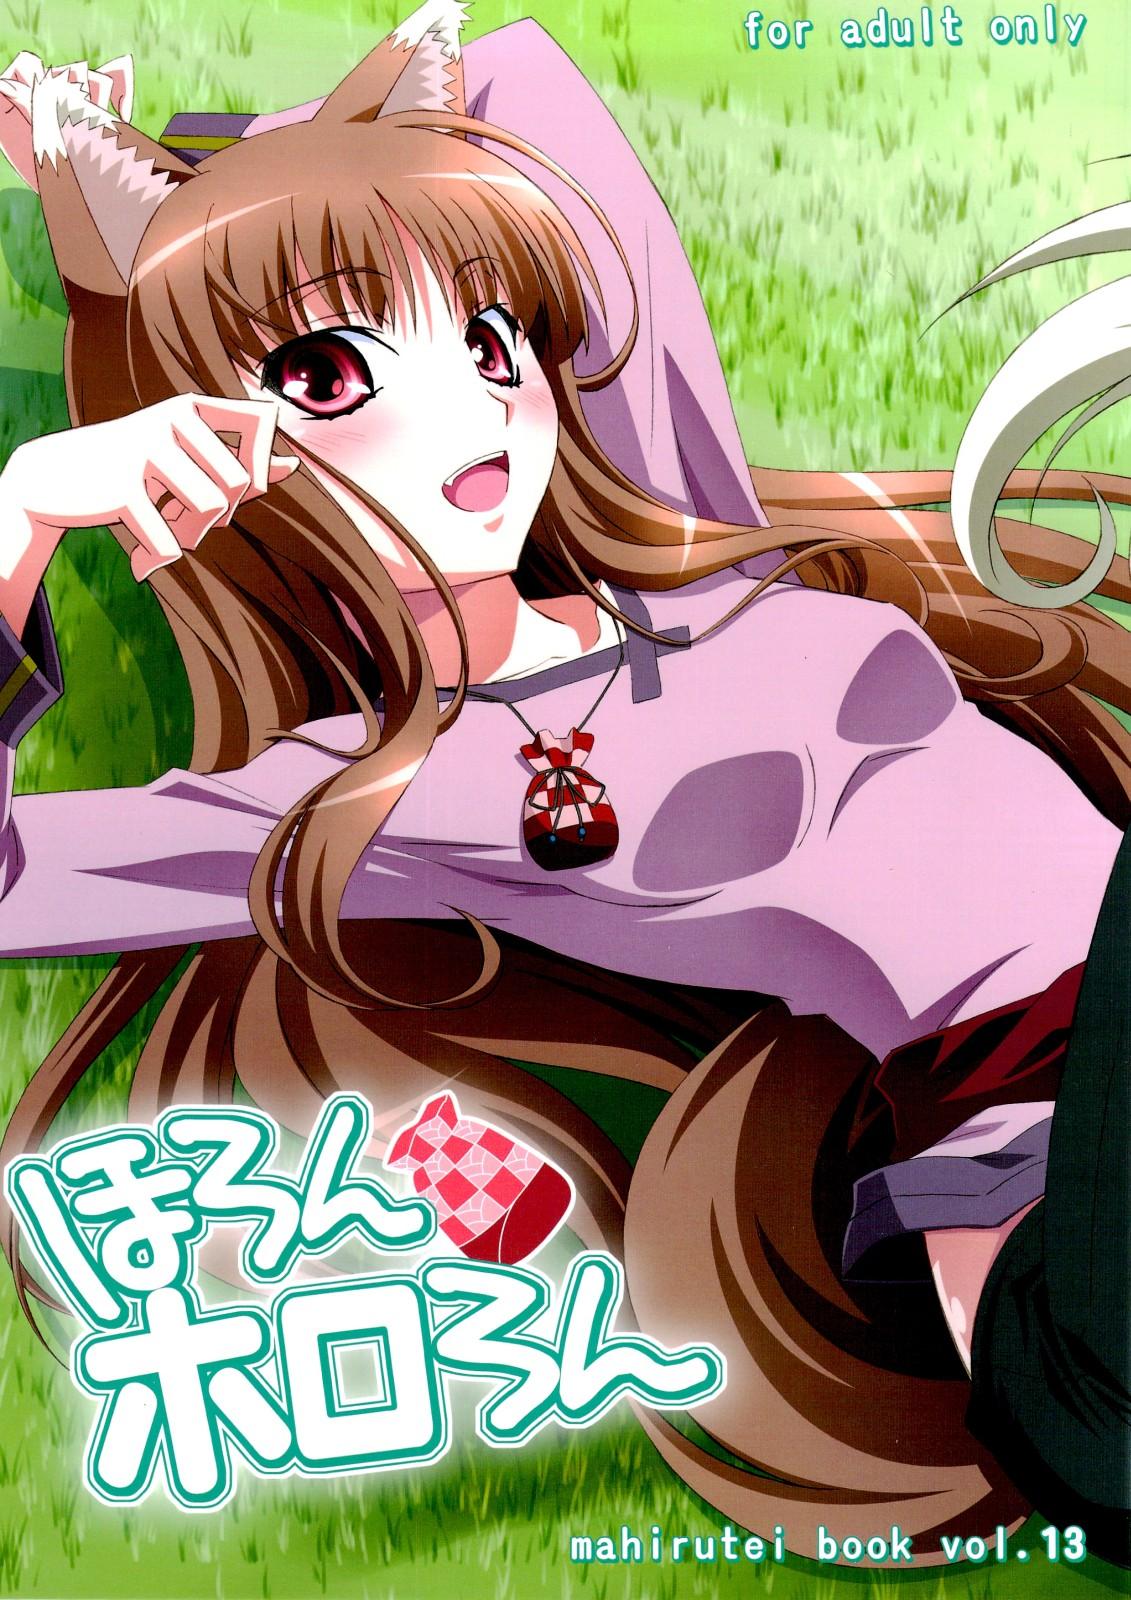 Perfect Butt Horon Hororon - Spice and wolf Awesome - Picture 1